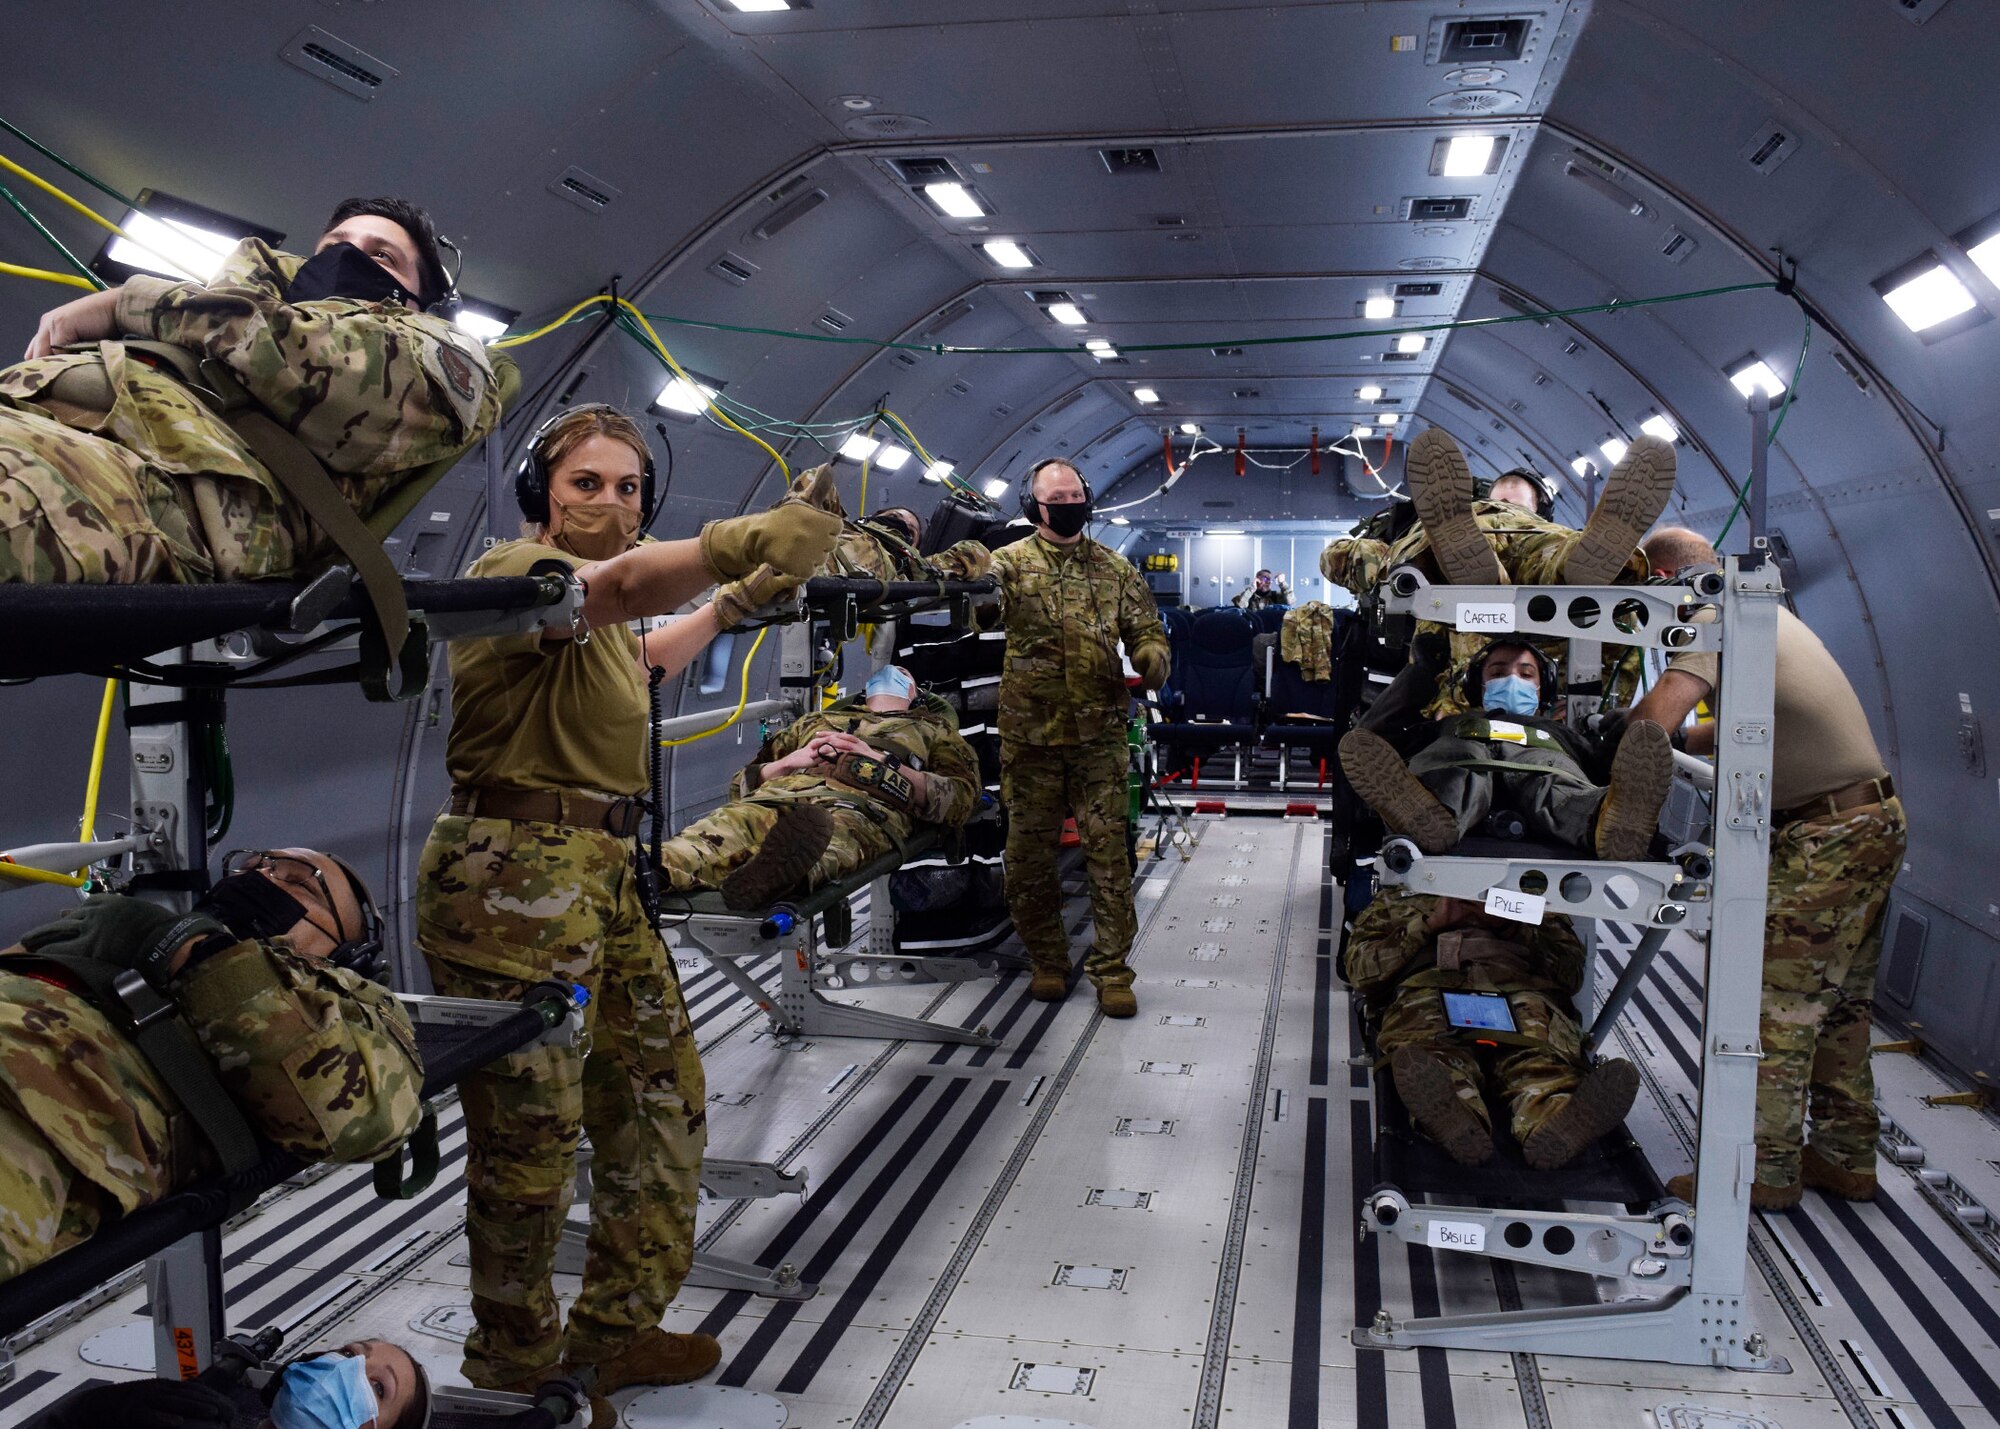 433rd Aeromedical Evacuation Squadron medics receive simulated patients onboard a KC-46A Pegasus during initial qualification training March 9, 2021, at Joint Base San Antonio-Lackland, Texas. During the training flights, the personnel simulated providing patient care to include responding to medical emergencies. (U.S. Air Force photo by Senior Airman Brittany Wich)